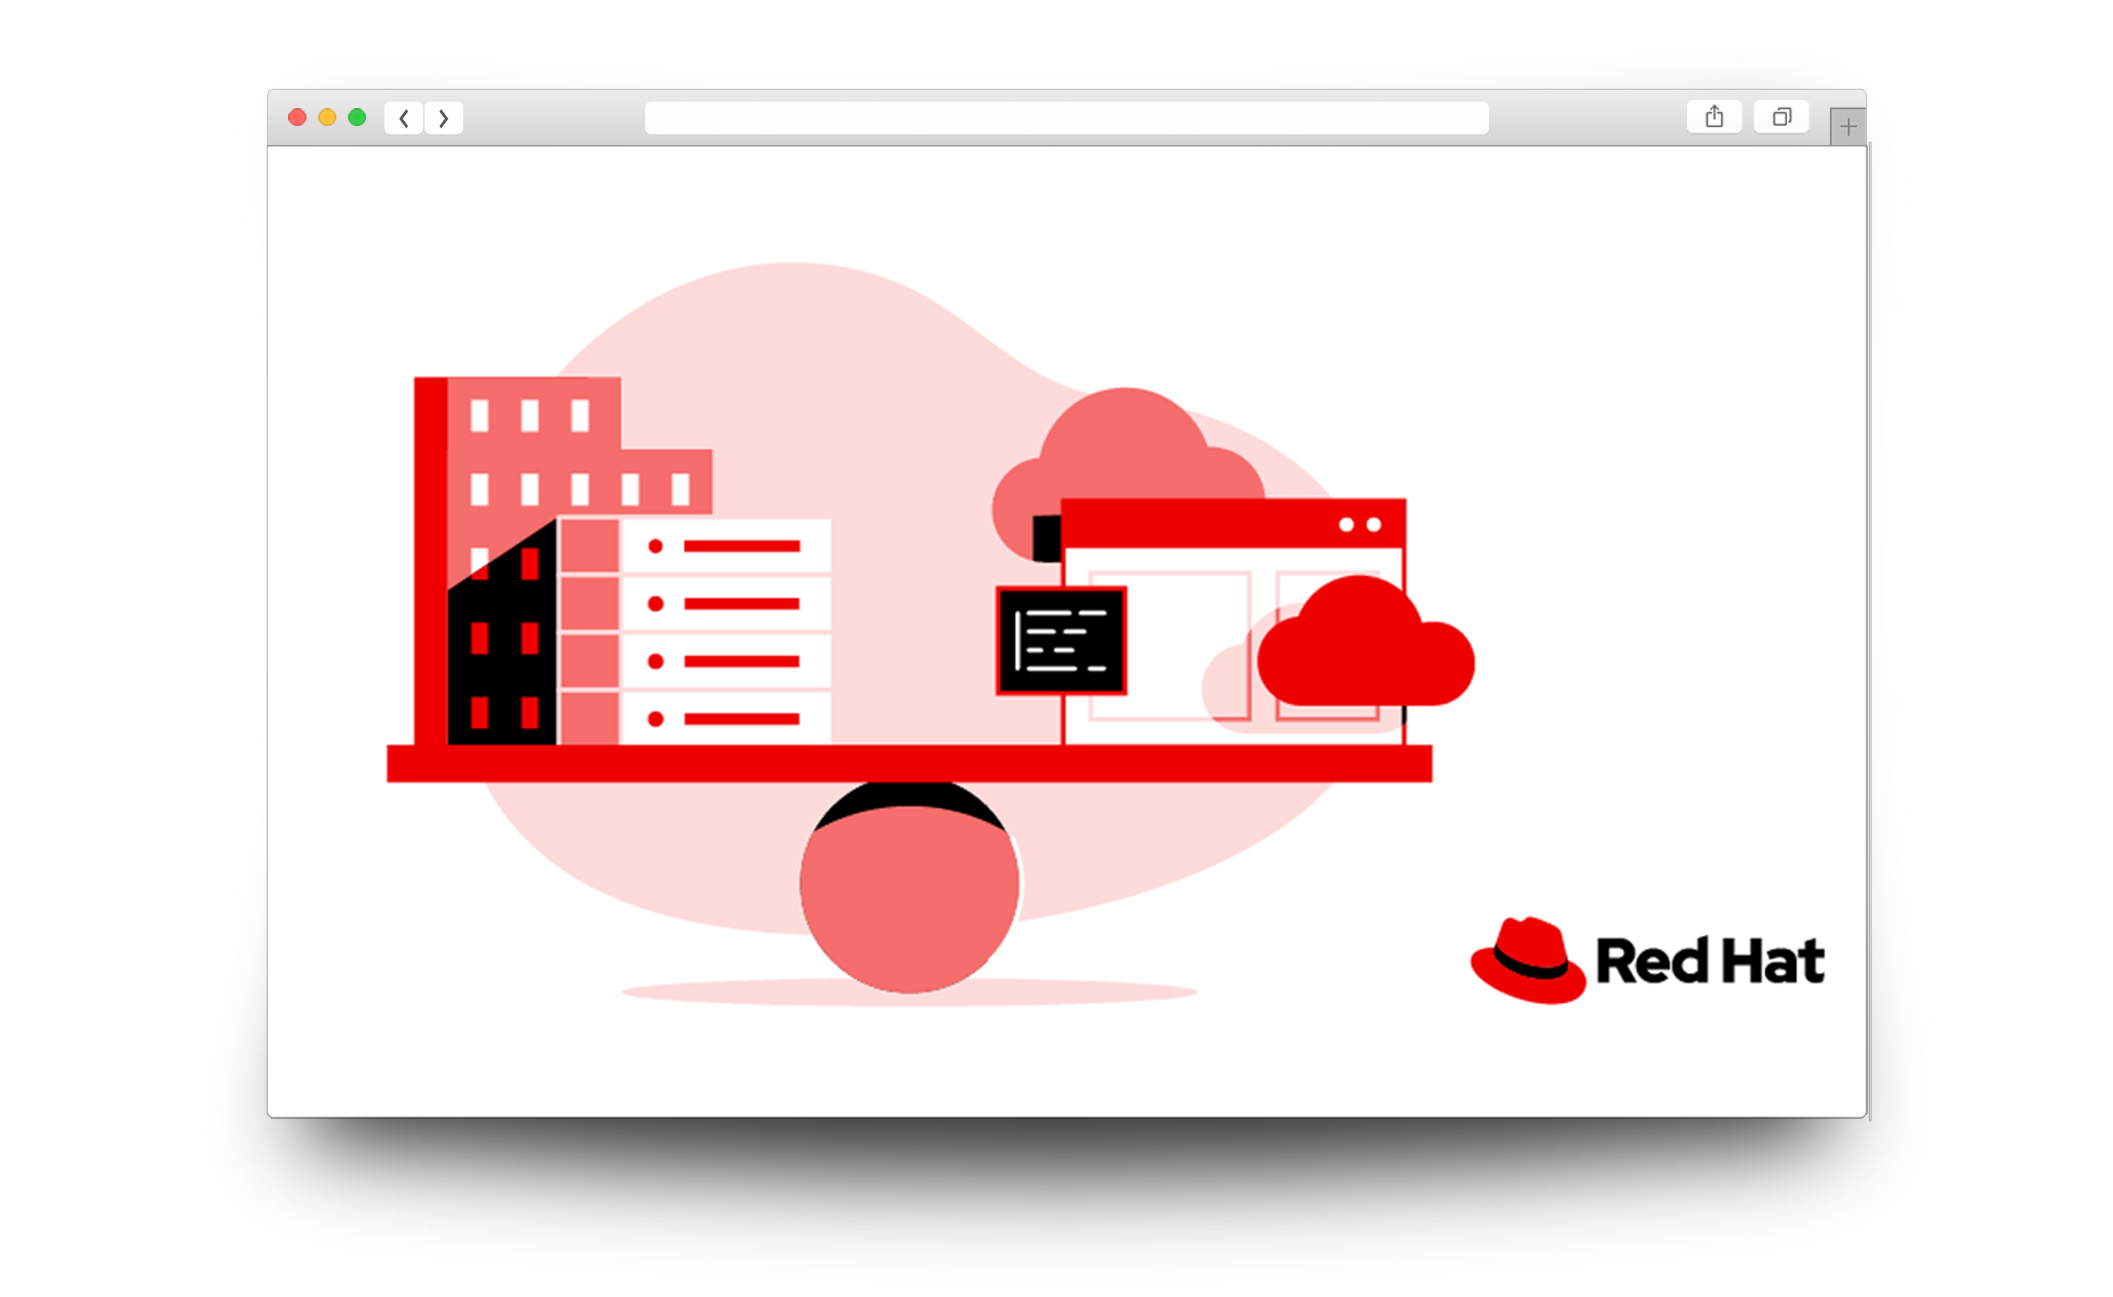 Infrastructure support to clients using Red Hat